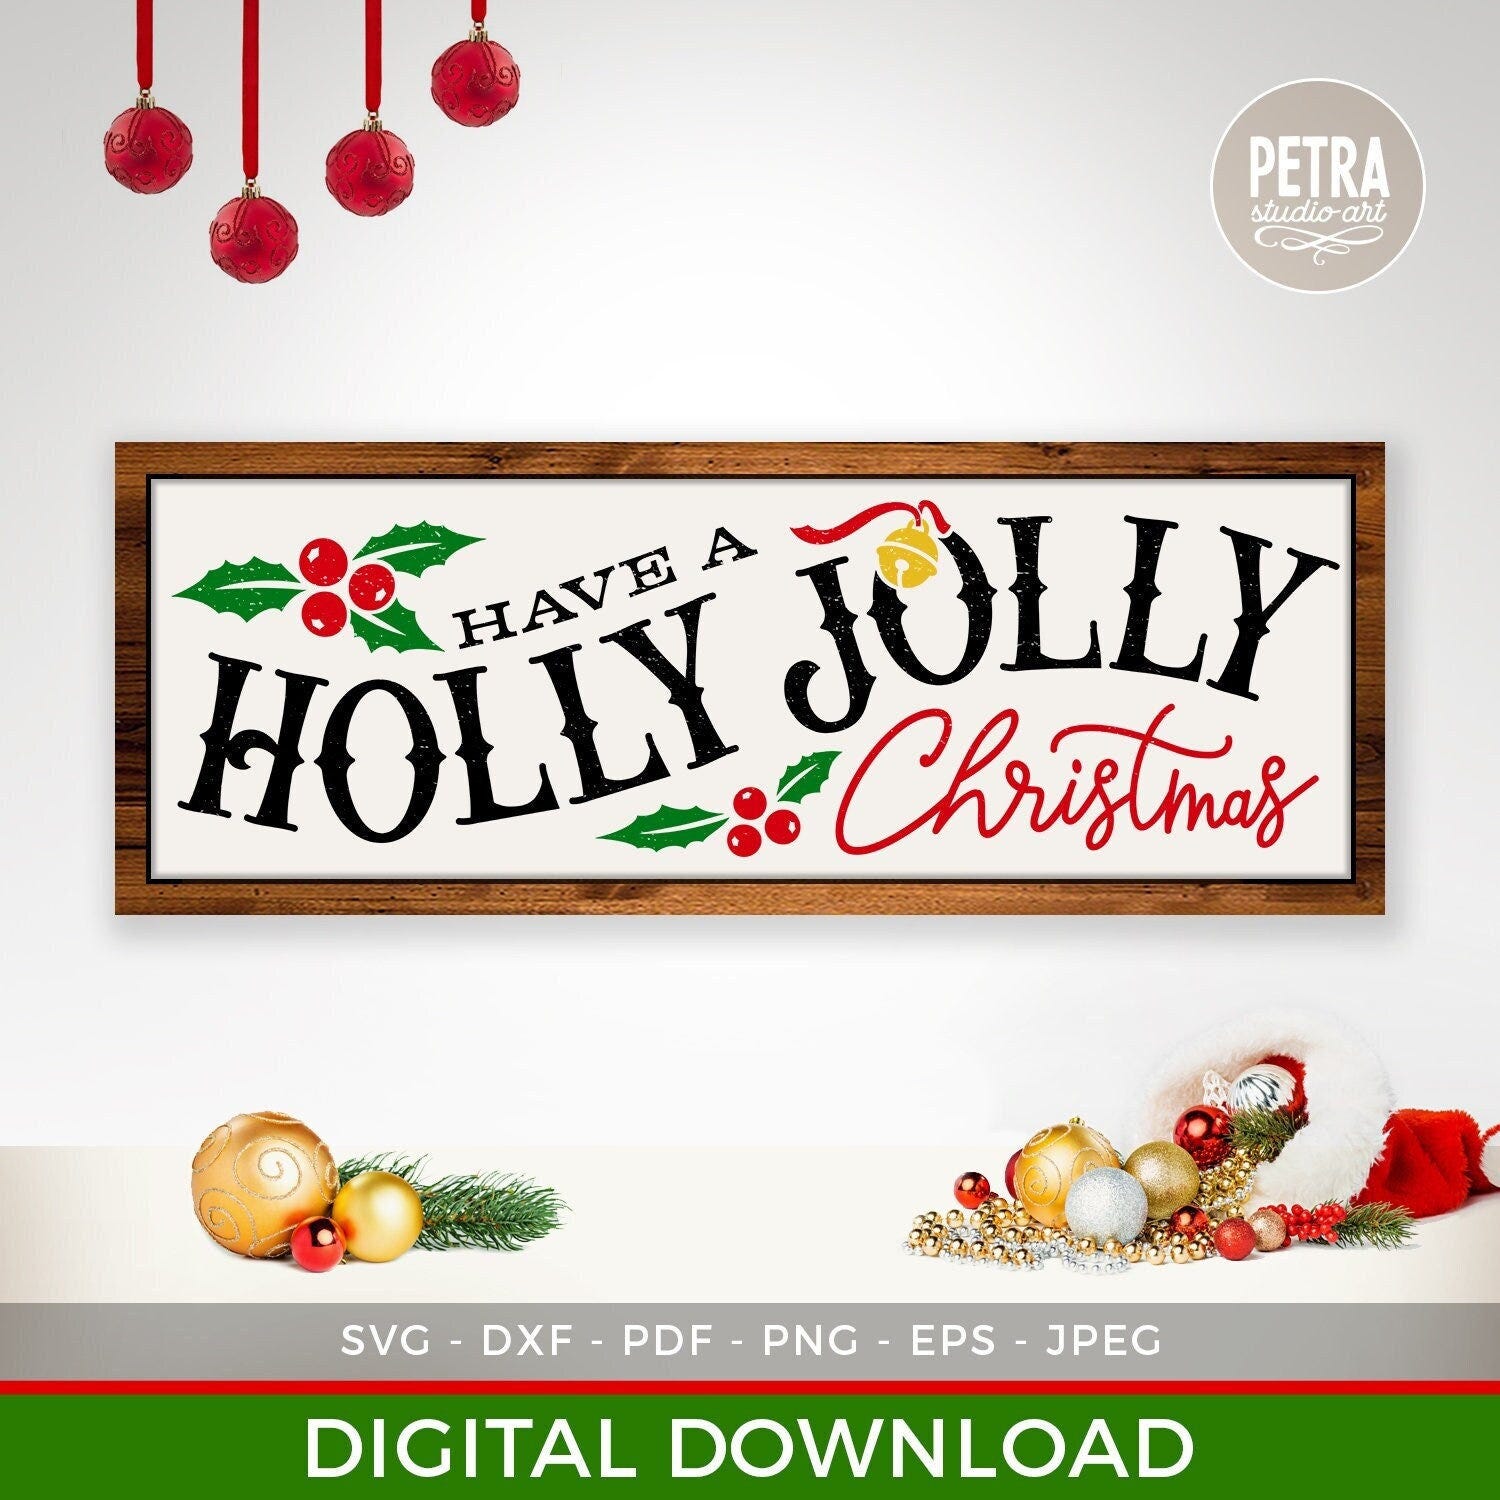 Have A Holly Jolly Christmas SVG Cut File. Great For Crafting Rustic Christmas Wall Decoration. For personal and small business use.